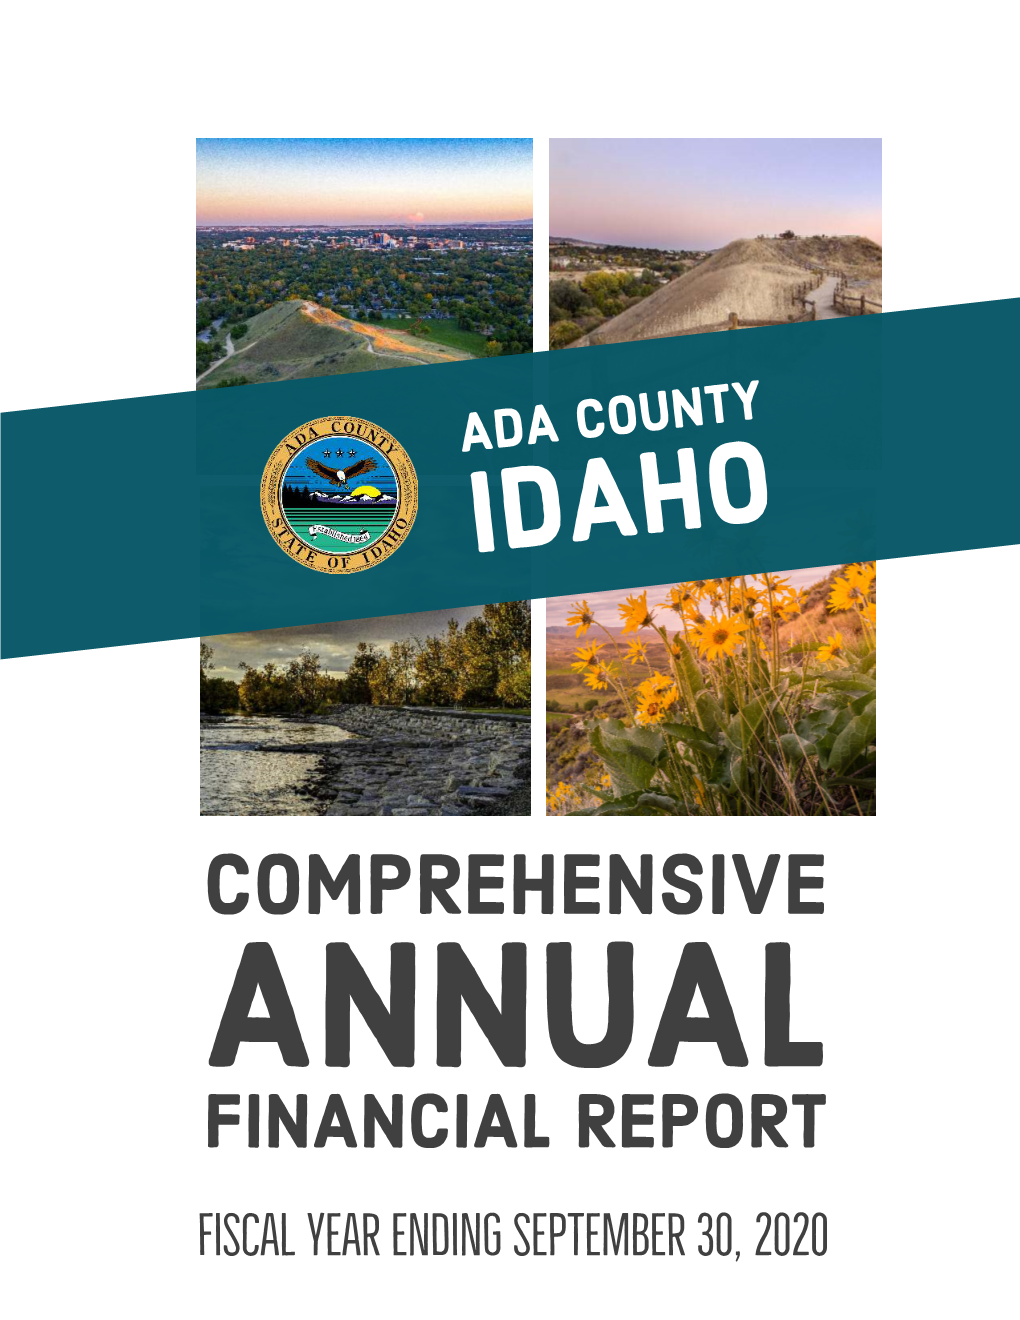 2020 Comprehensive Annual Financial Report (CAFR)